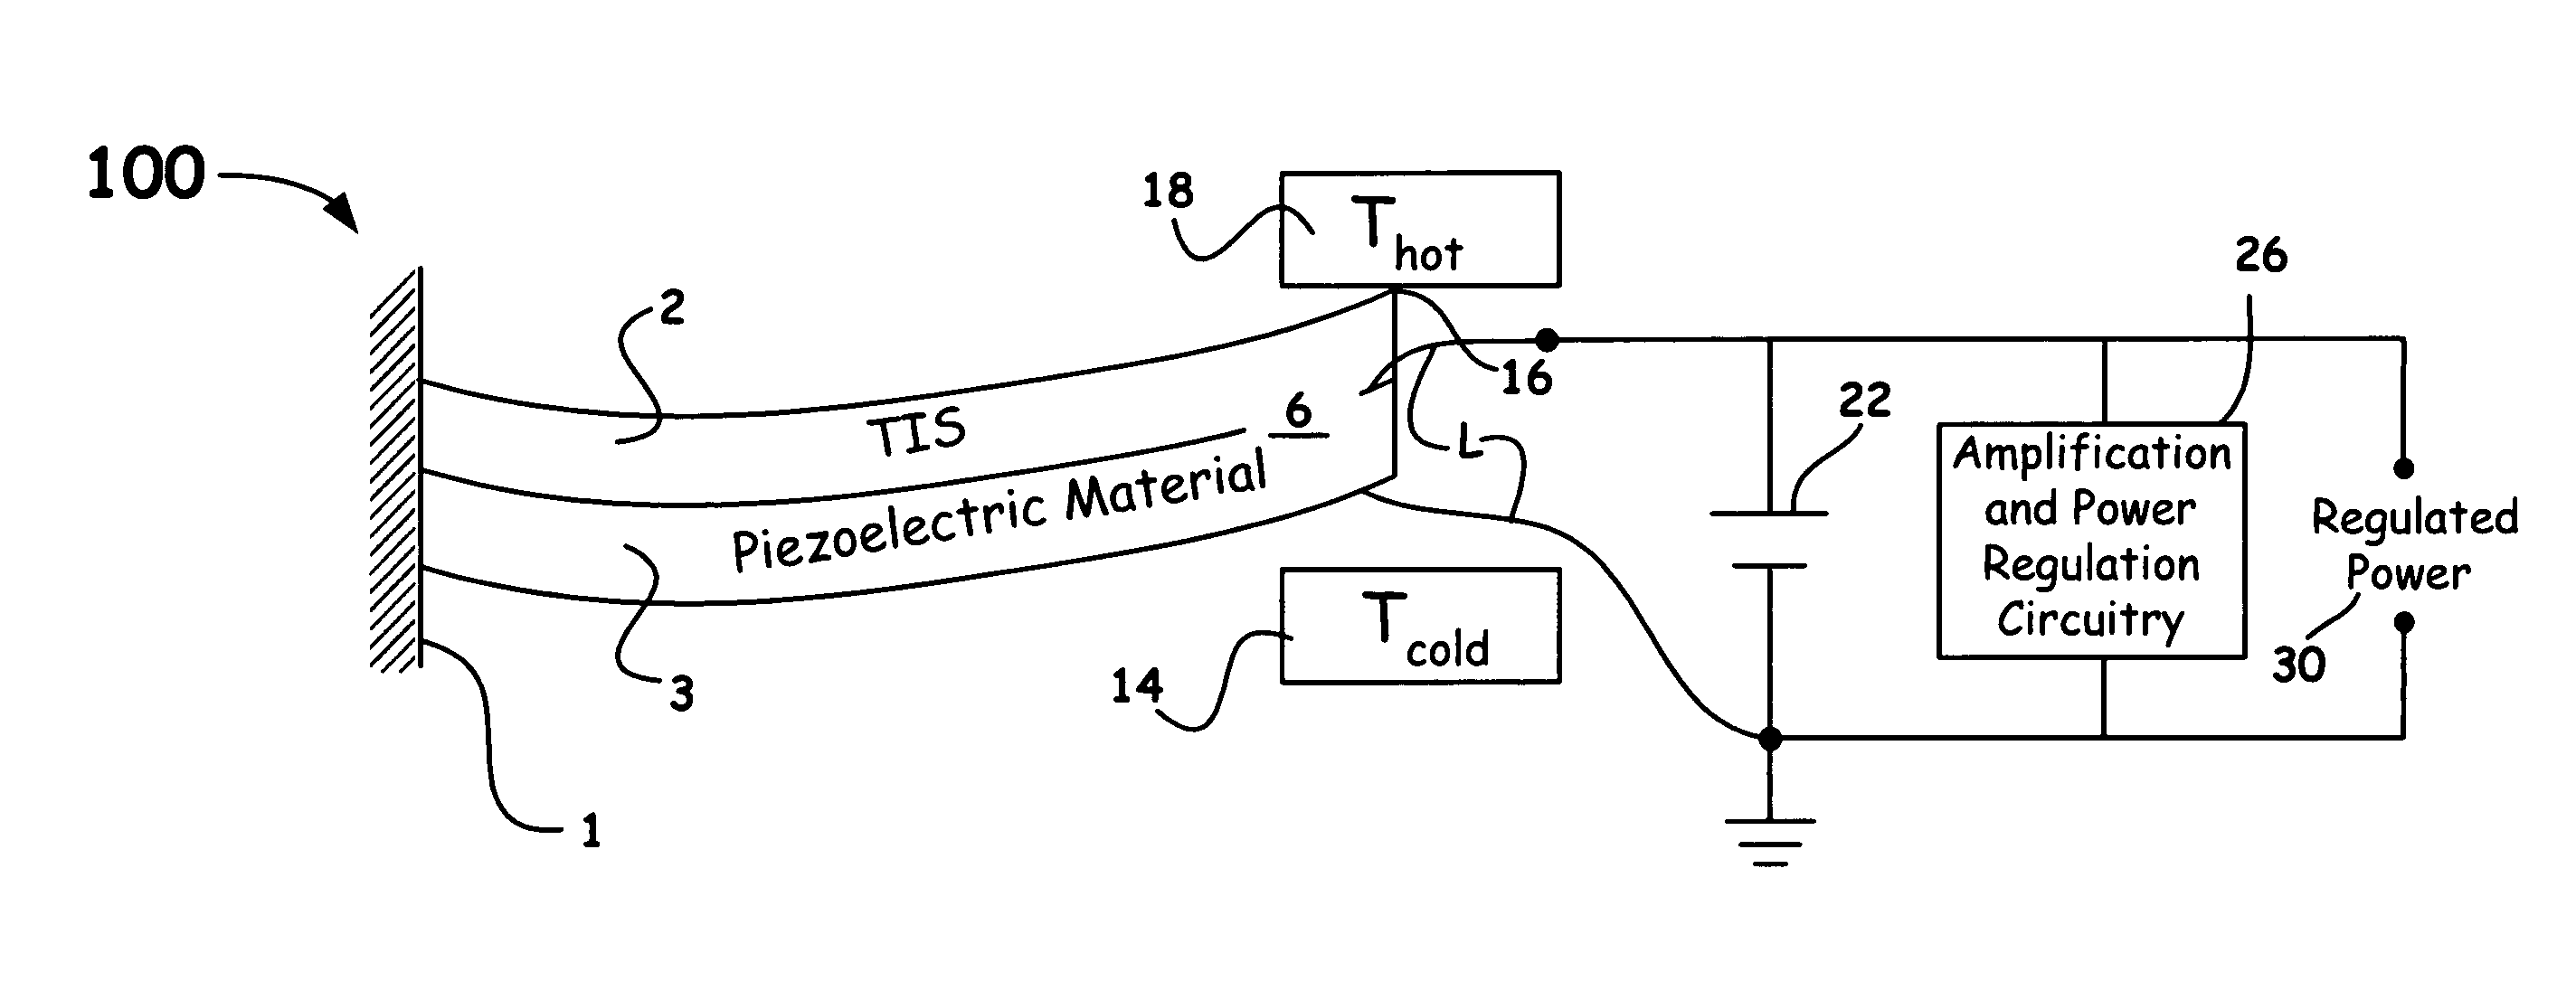 Energy harvesting using a thermoelectric material